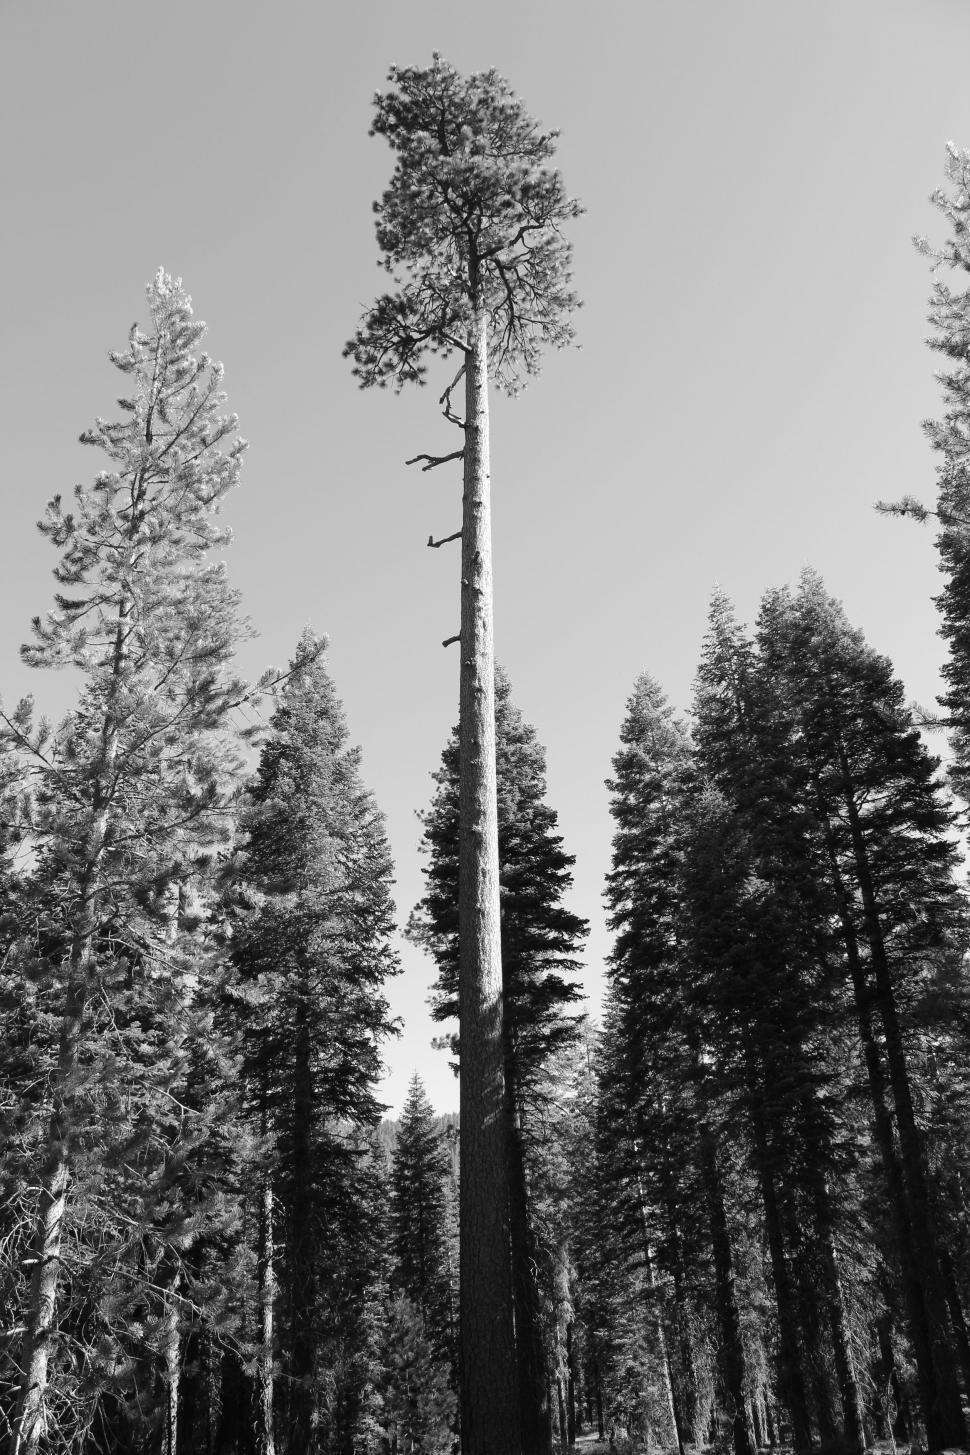 Free Image of Tall Tree in Black and White 